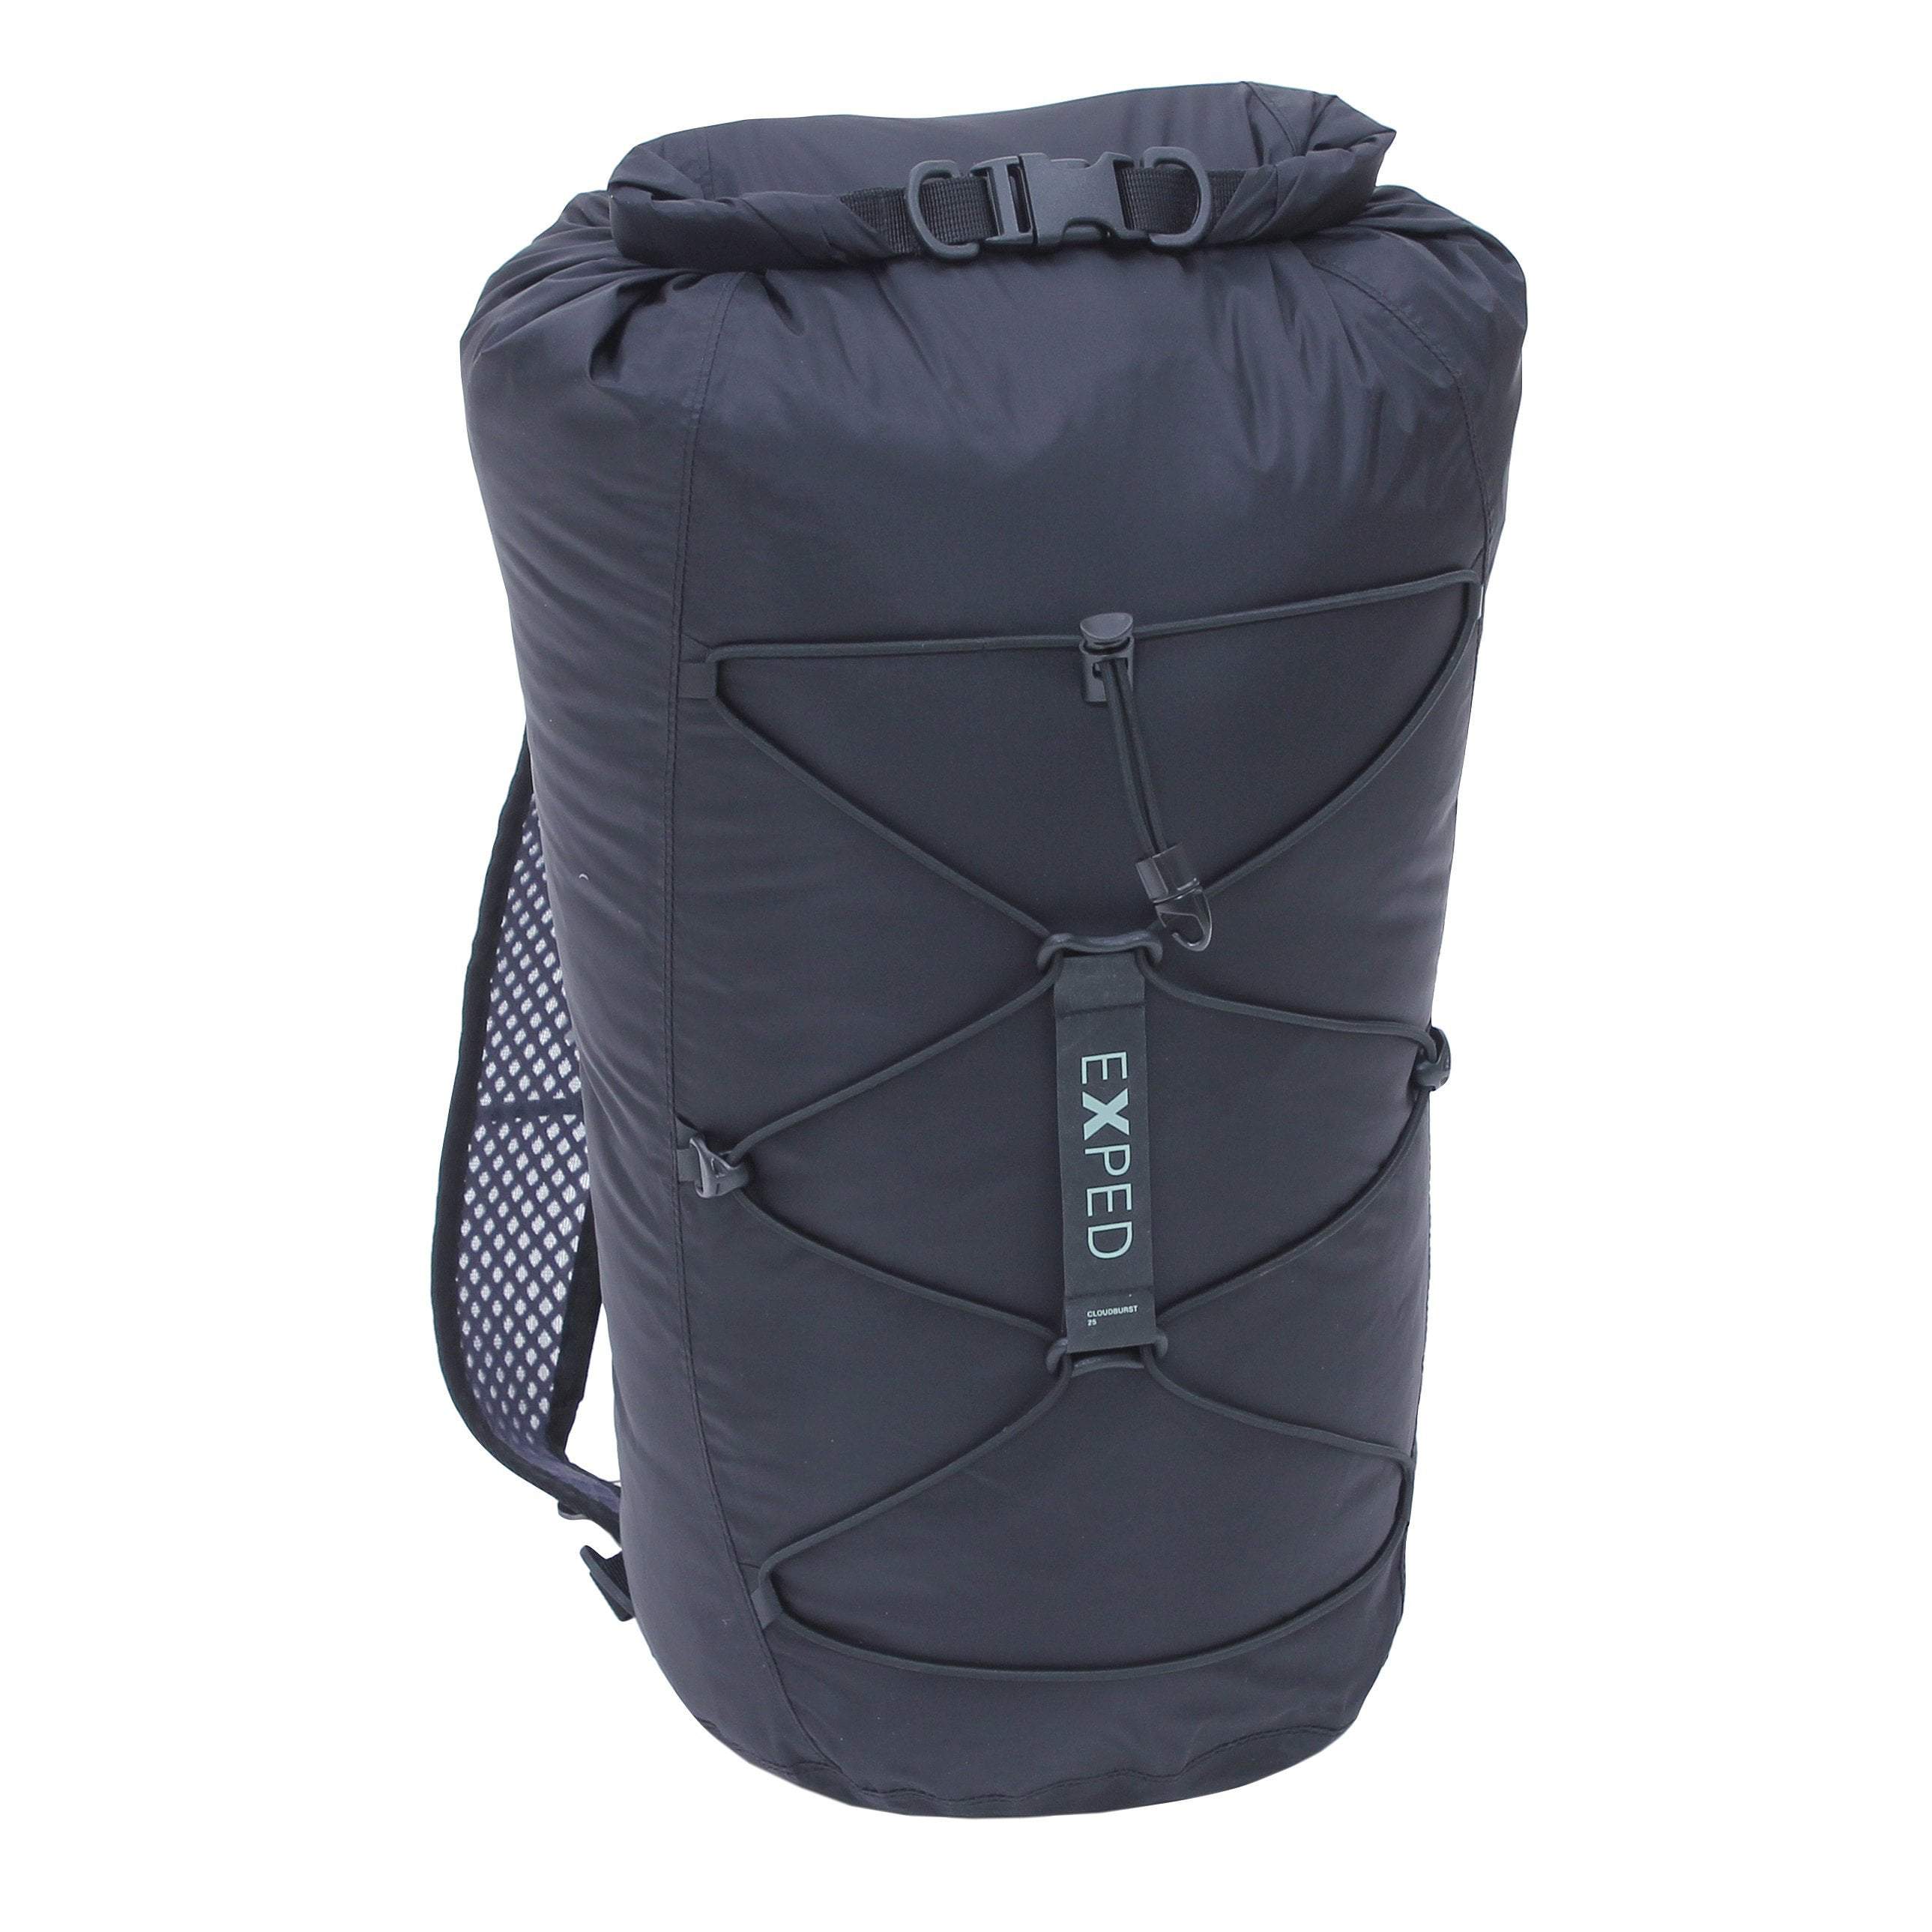 Exped One Size / Black Cloudburst 25 Day Pack